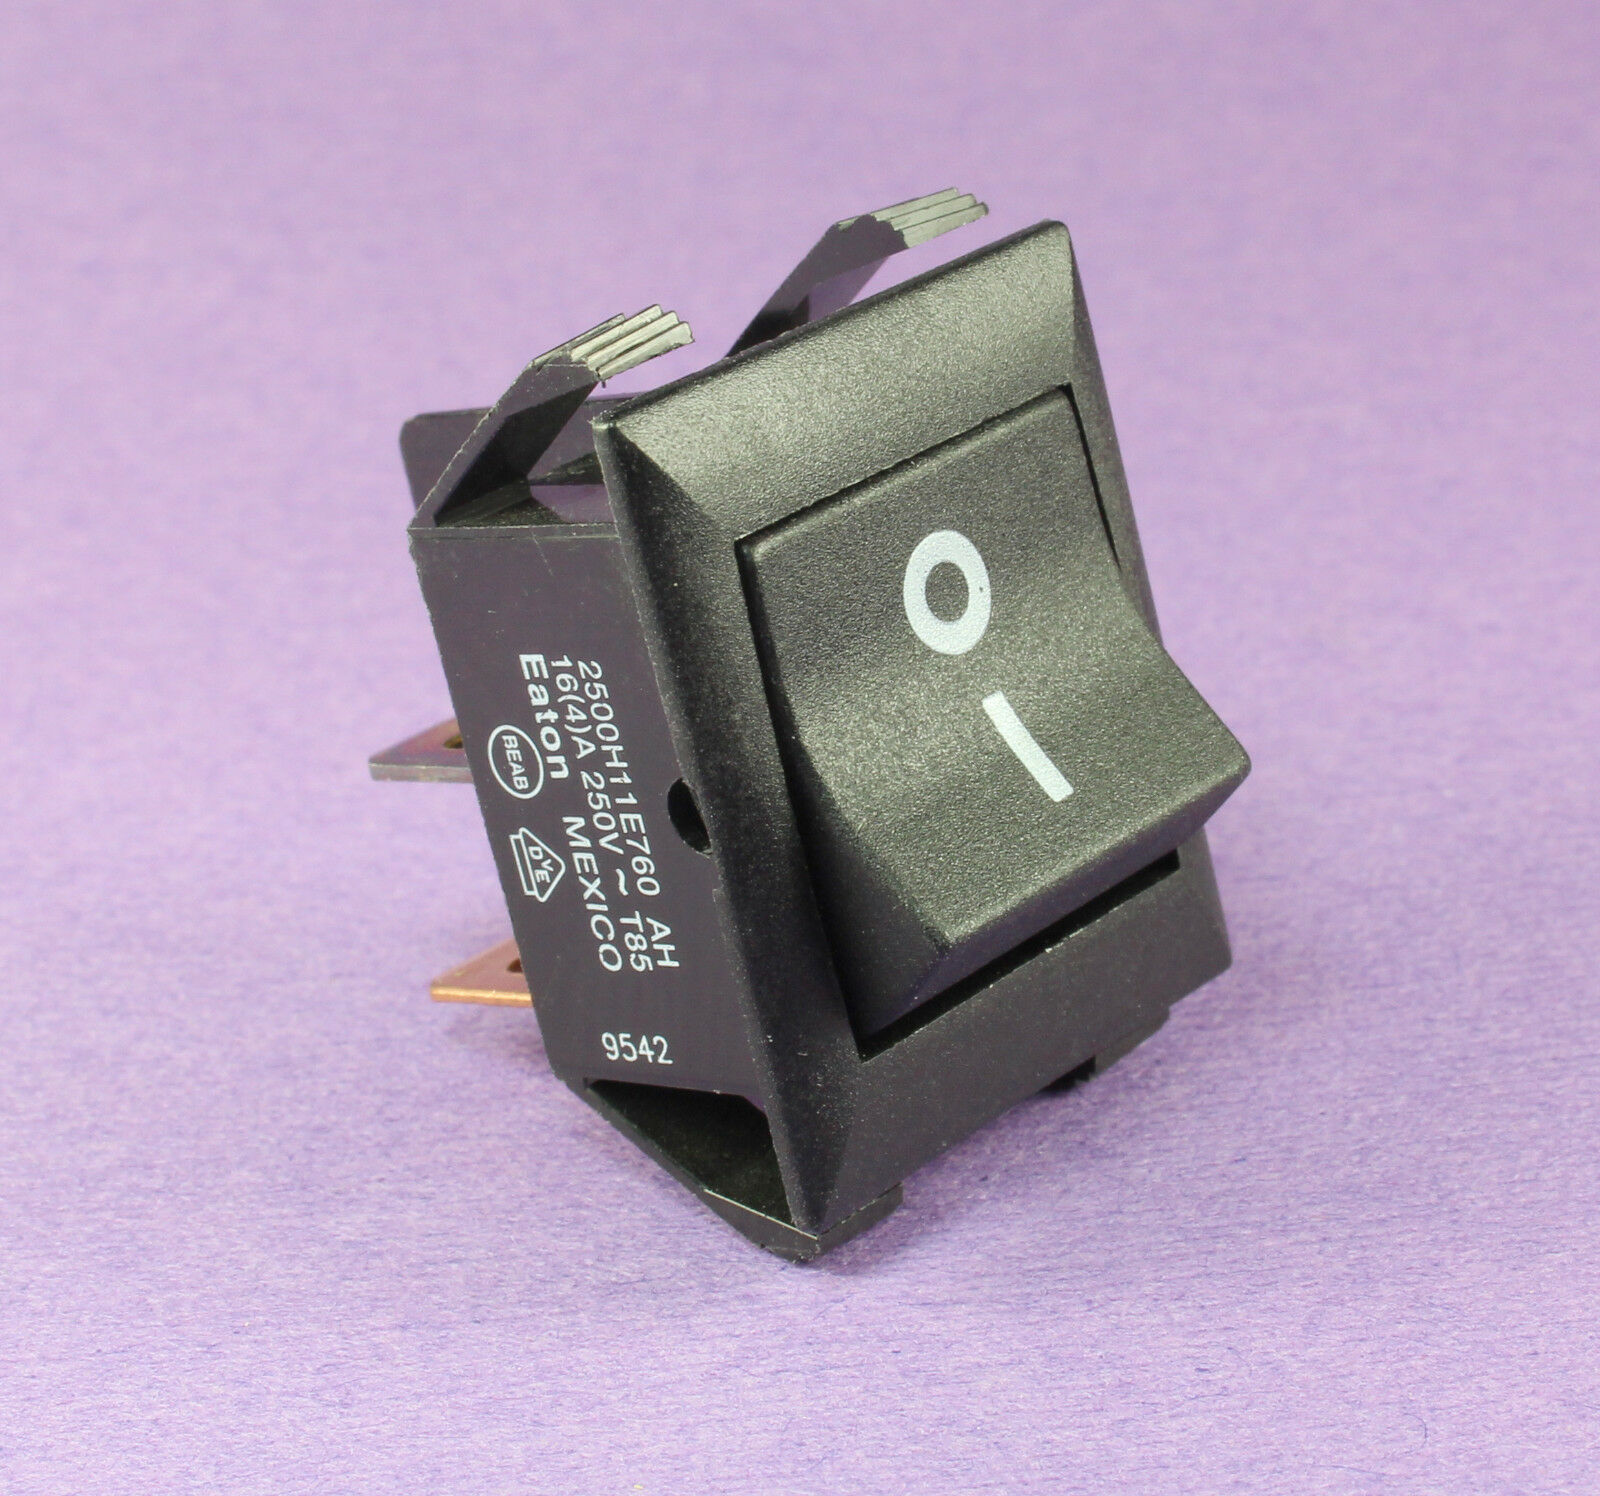 1pc  Eaton 22A 125vac, Rocker Switch SPST, ON/OFF, High Inrush Current  2500 - $12.75